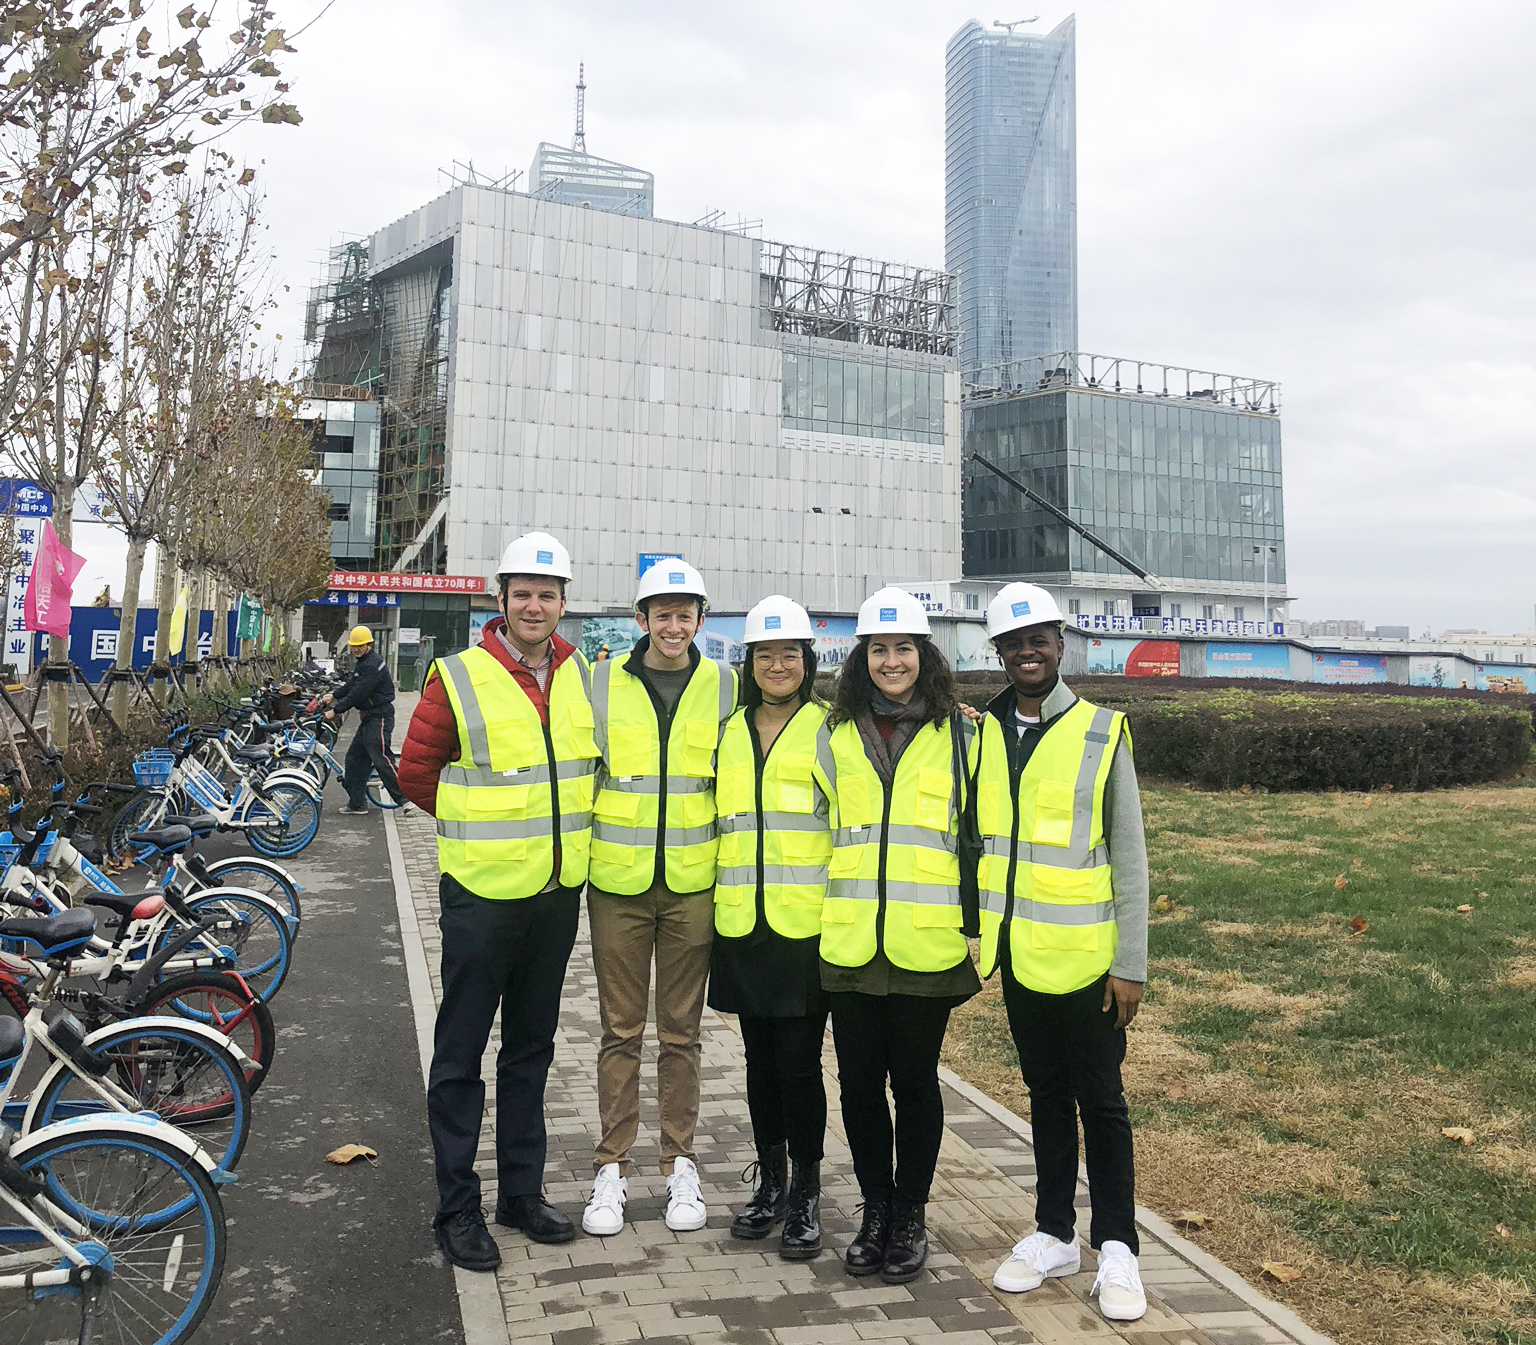 A construction tour of The Tianjin Juilliard School building with Dean Meyer and Juilliard students.  Photo credit: Bethany Marshall